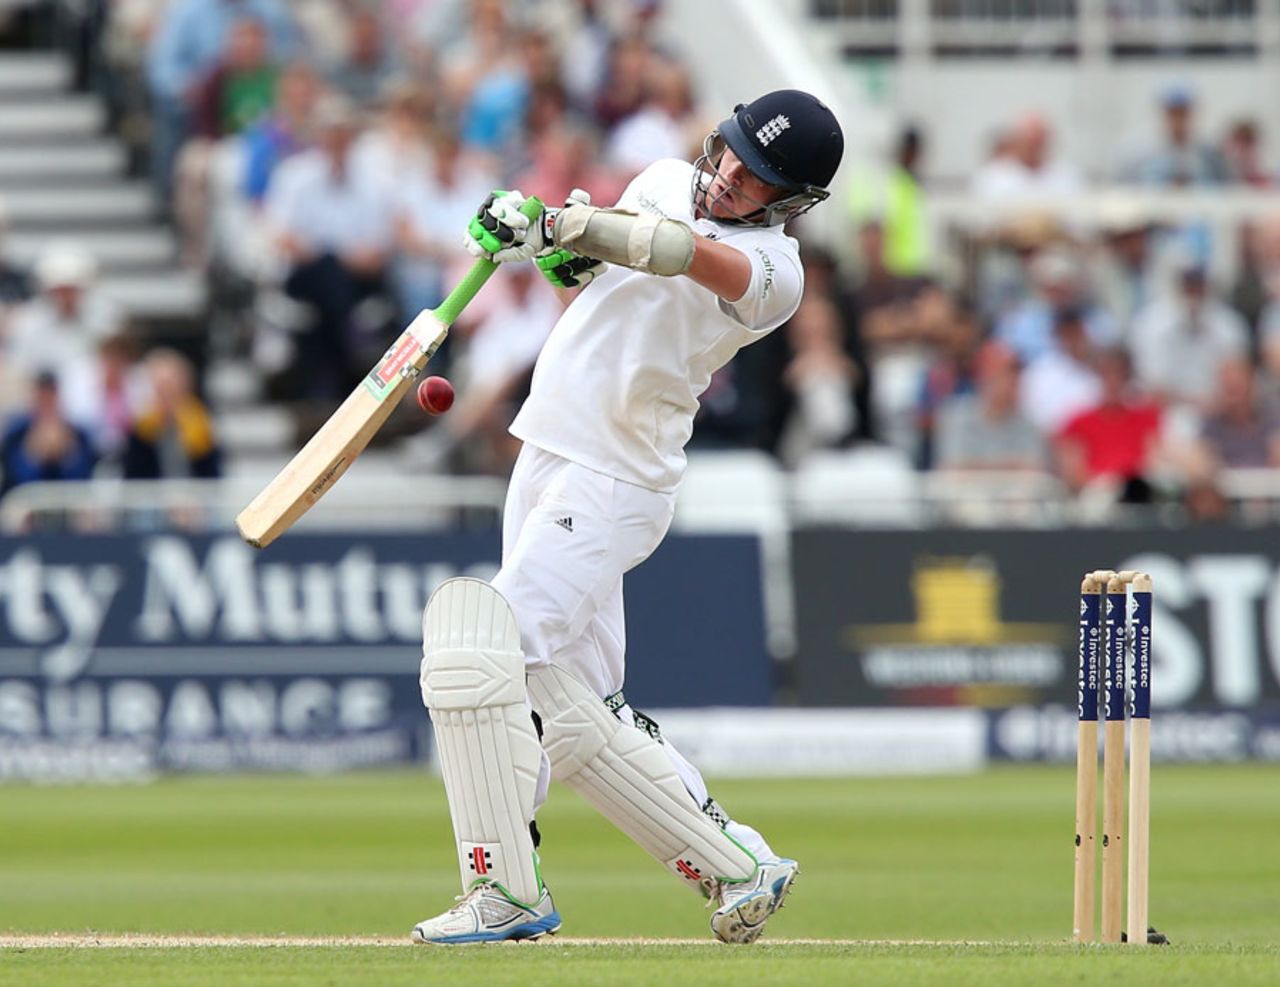 Sam Robson deals with a rare delivery that misbehaved, England v India, 1st Investec Test, Trent Bridge, 3rd day, July 11, 2014